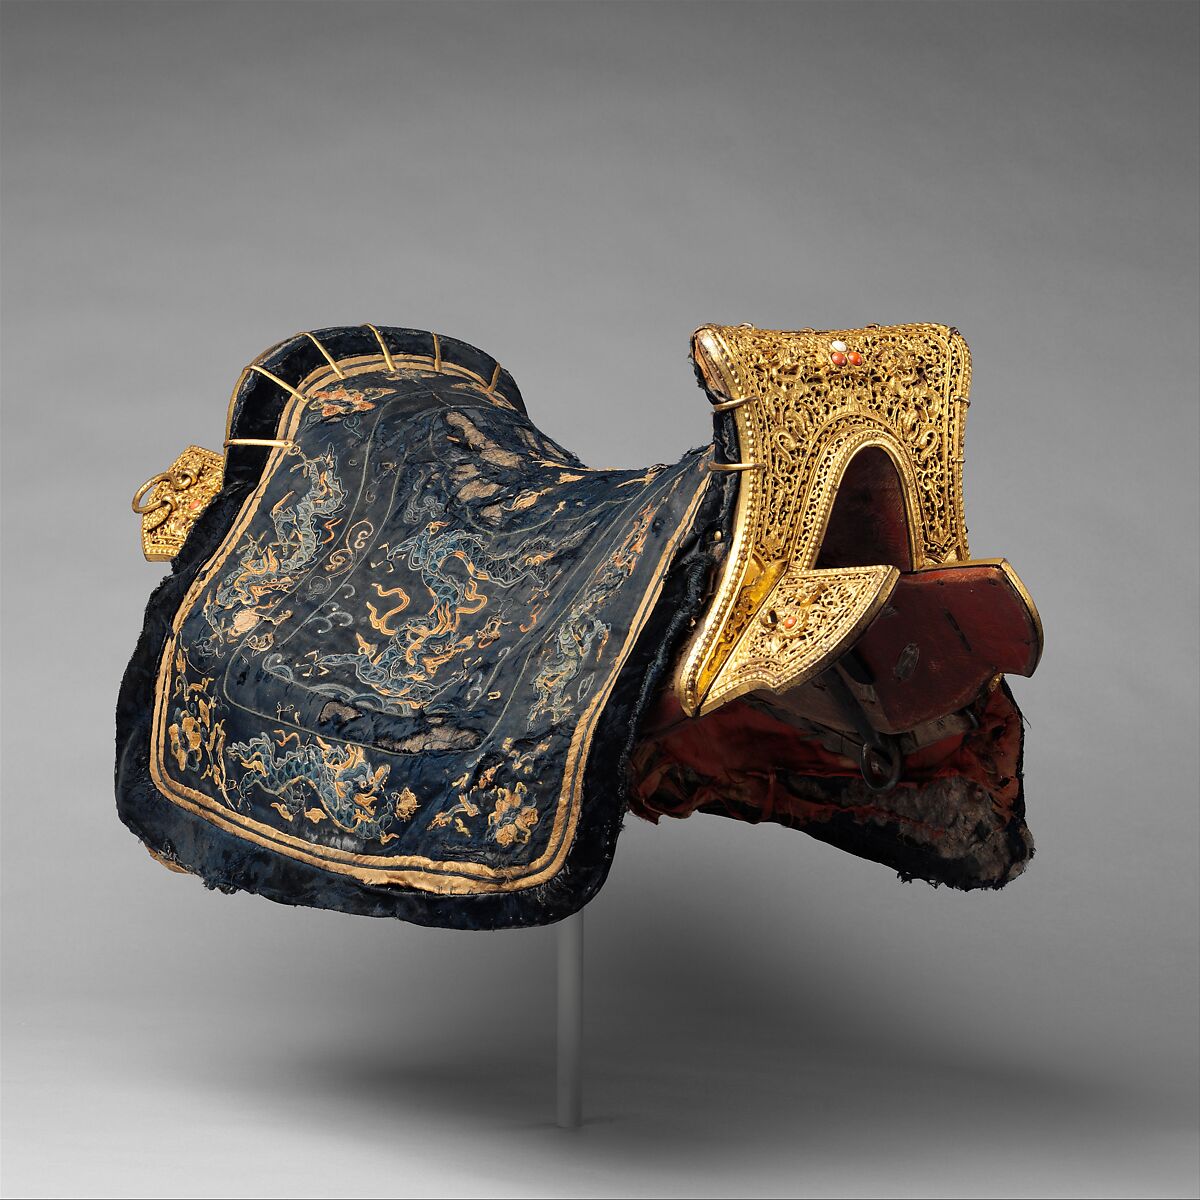 Saddle (清    馬鞍一套), Iron, gold, silver, wood, coral, ivory, silk, hair, tin, pigments, leather, Chinese 